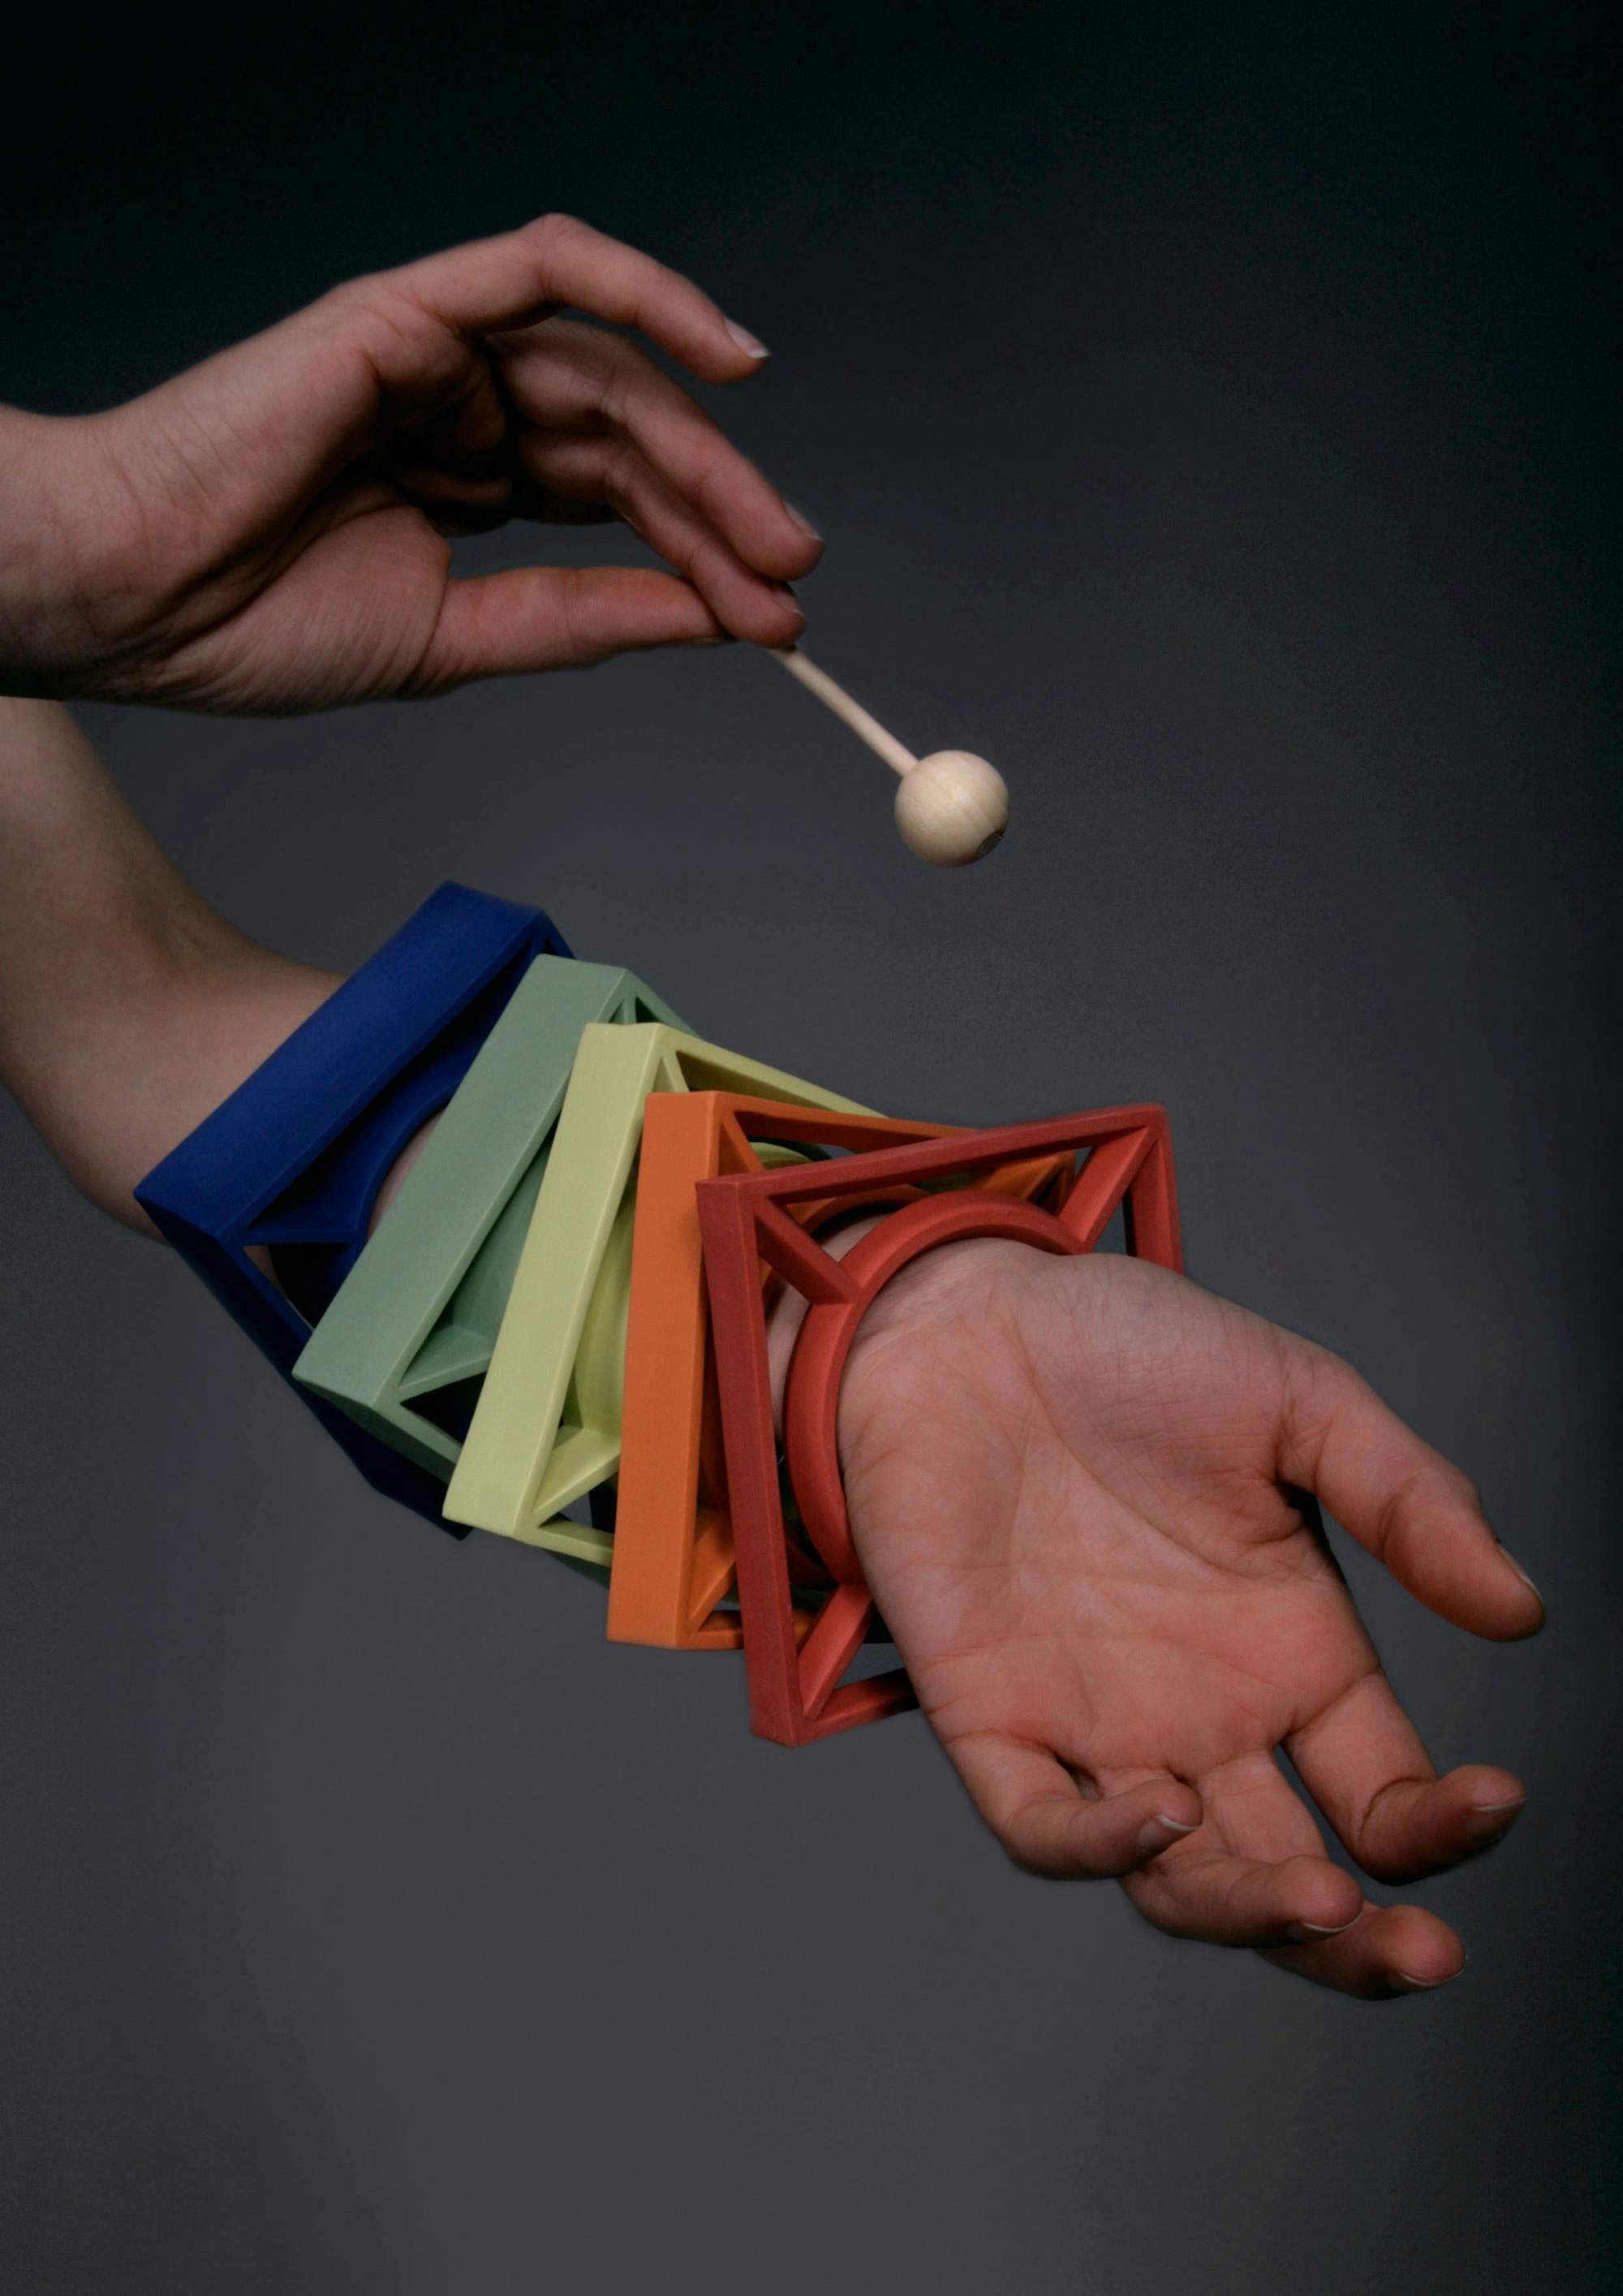 Xylophone Bangles by Arjen Noordeman and Christie Wright.